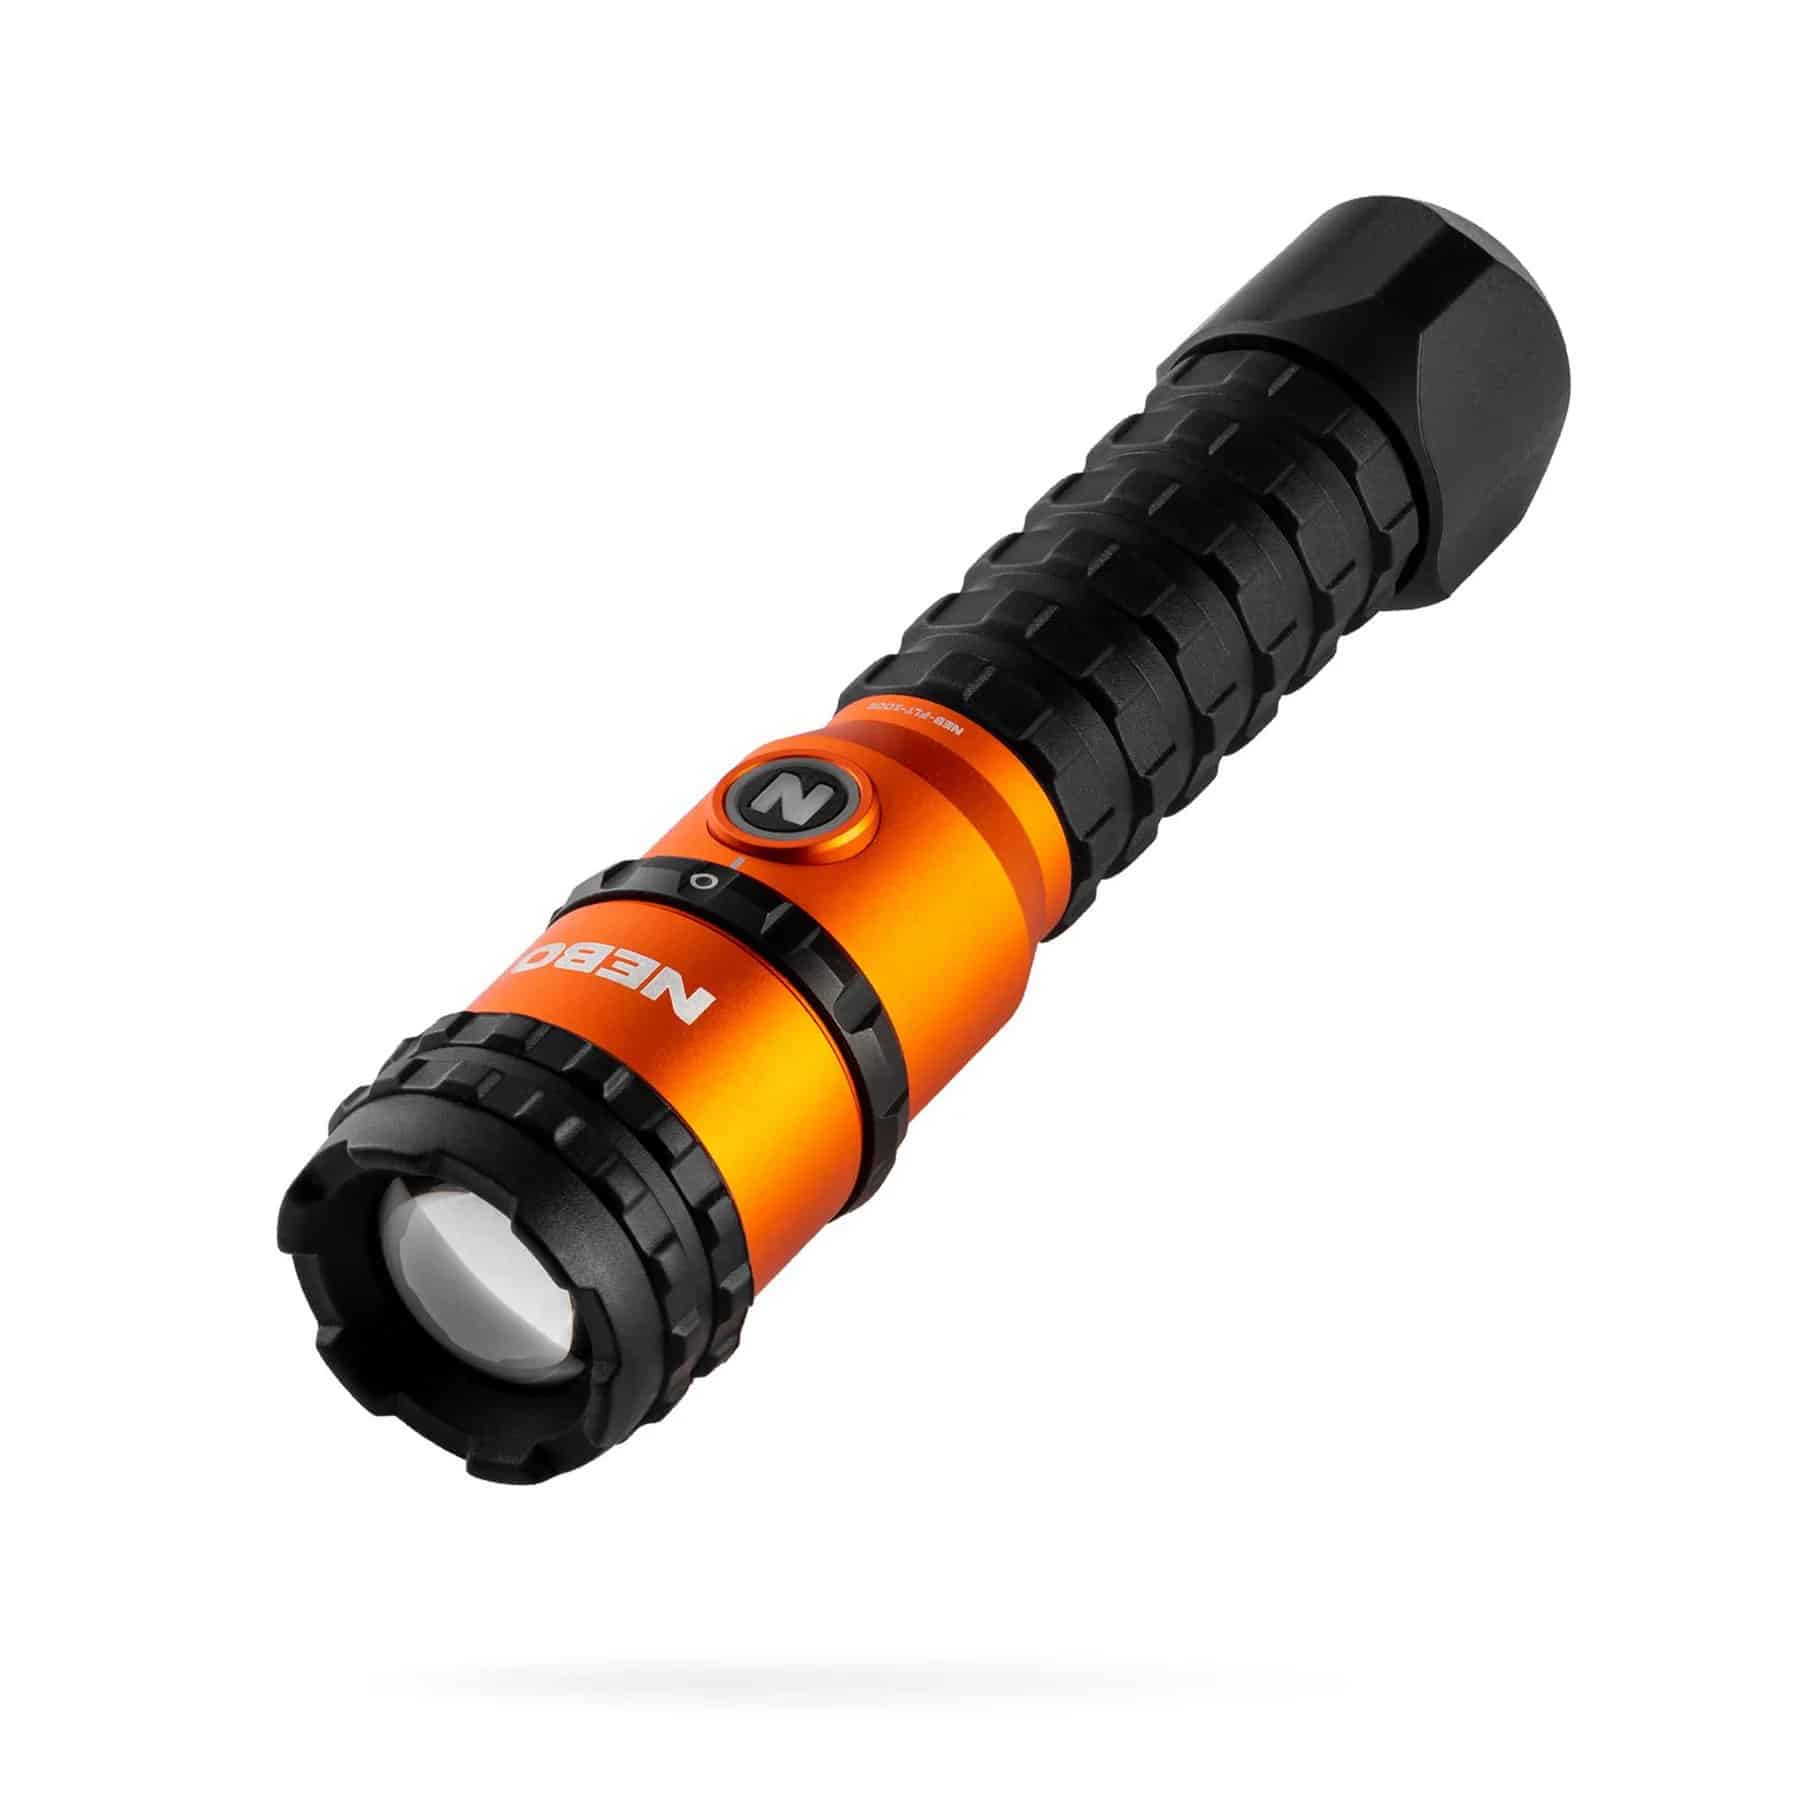 NEBO Master Series FL3000 Rugged Rechargeable Flashlight